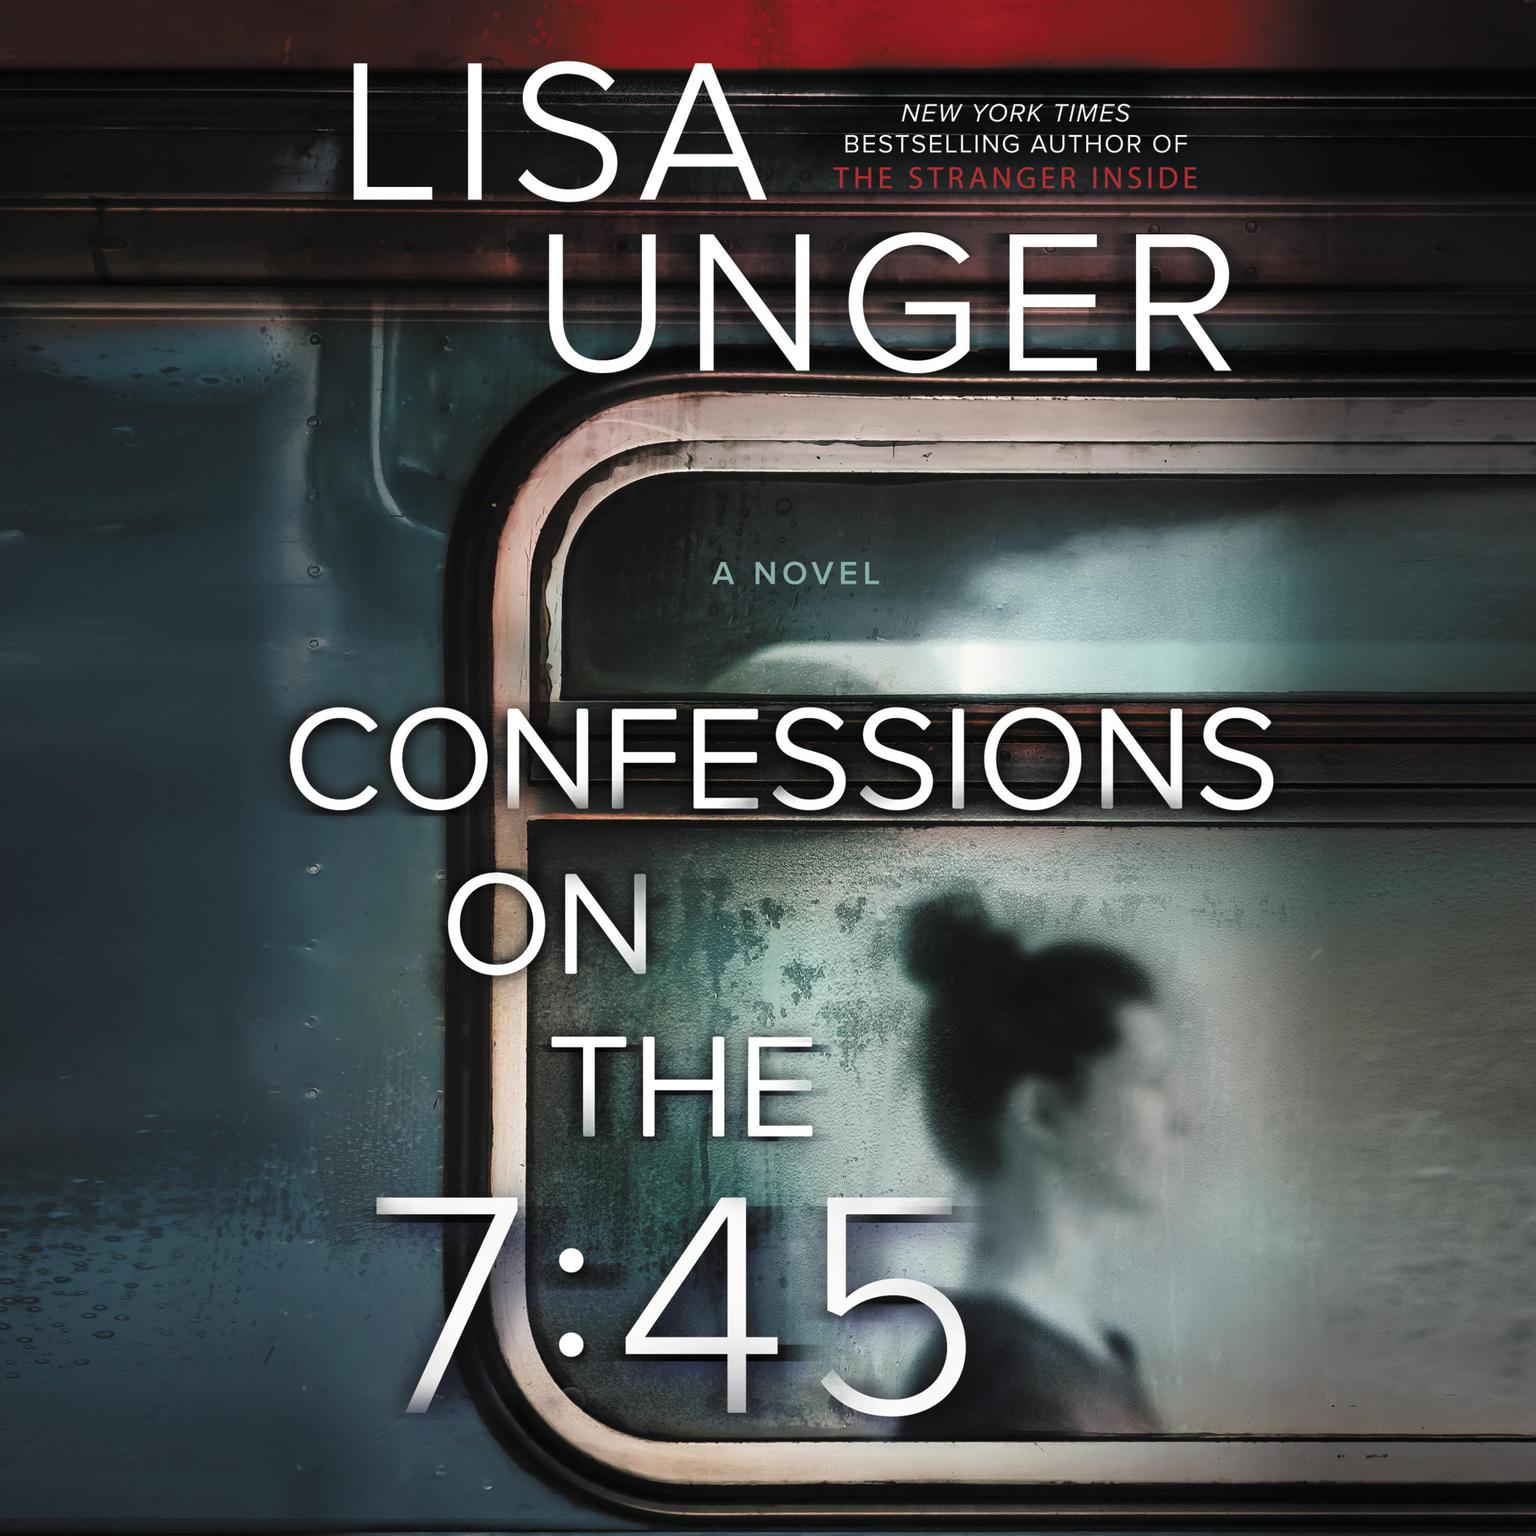 Confessions on the 7:45: A Novel Audiobook, by Lisa Unger